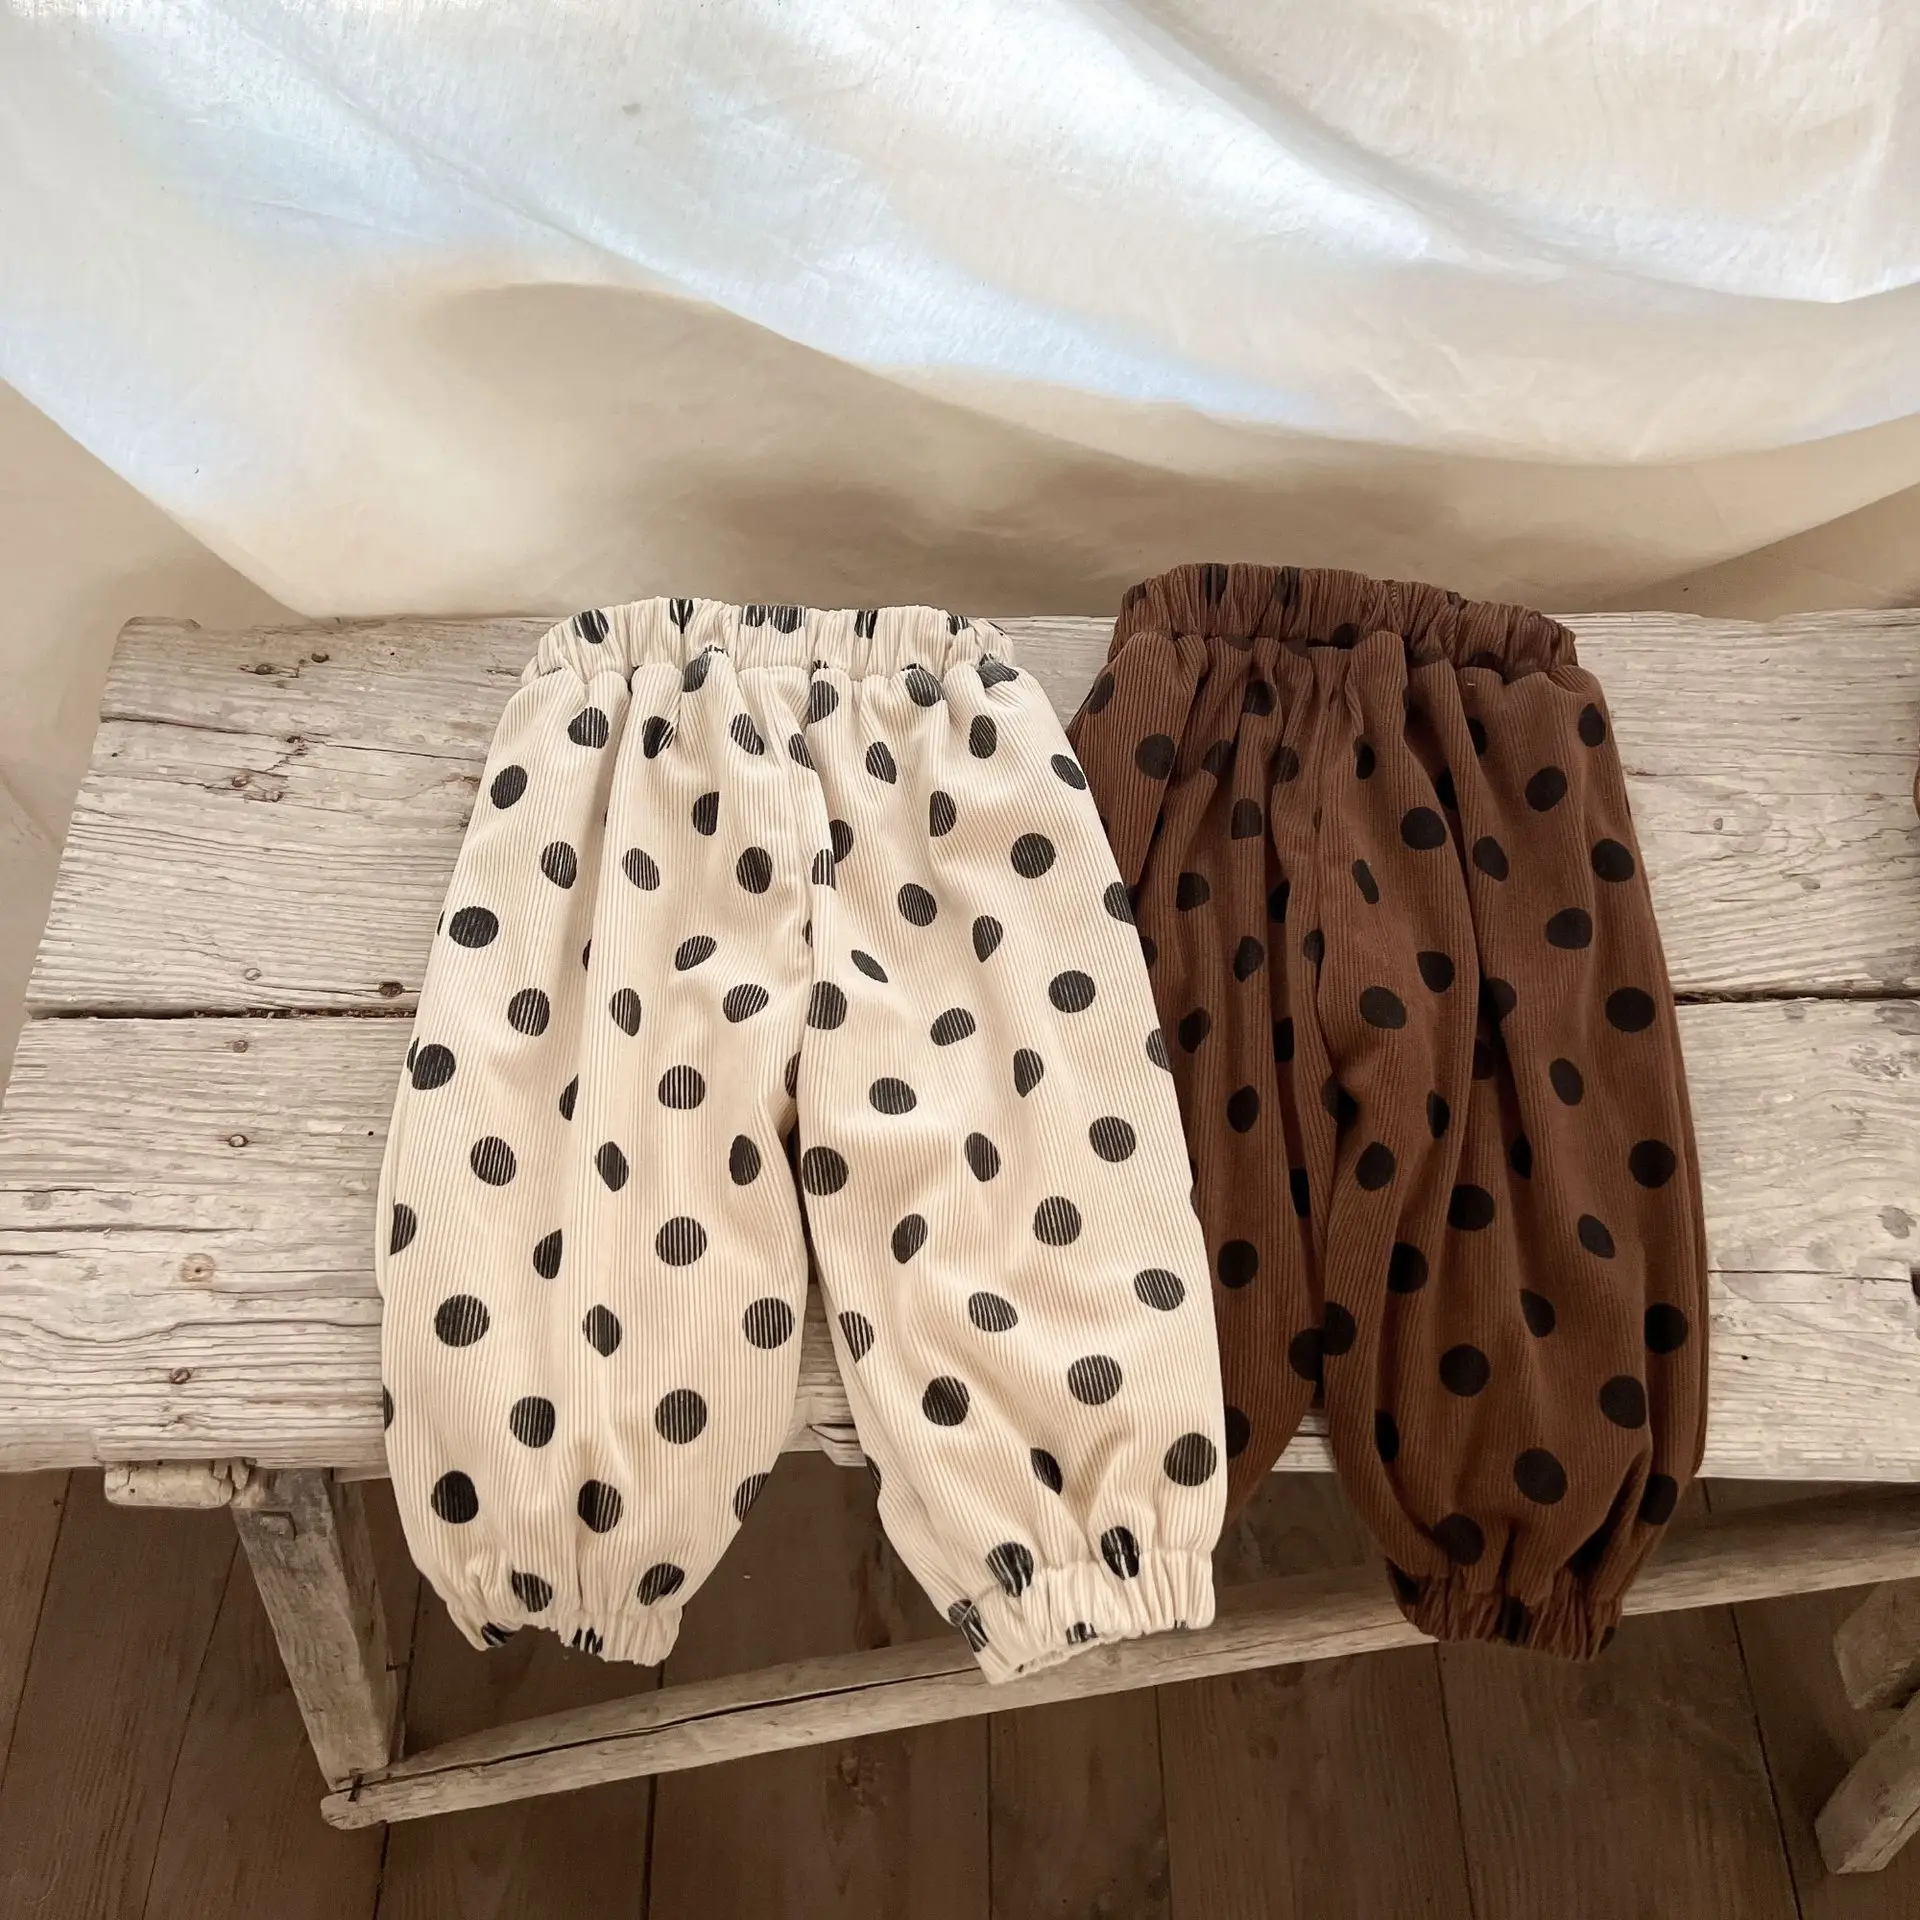 Lnfants And Children's Winter Loose Toilet Pants, Boys And Girls, Thickened Corduroy Trousers, Warm, Polka Dot Pants, Baby Cloth